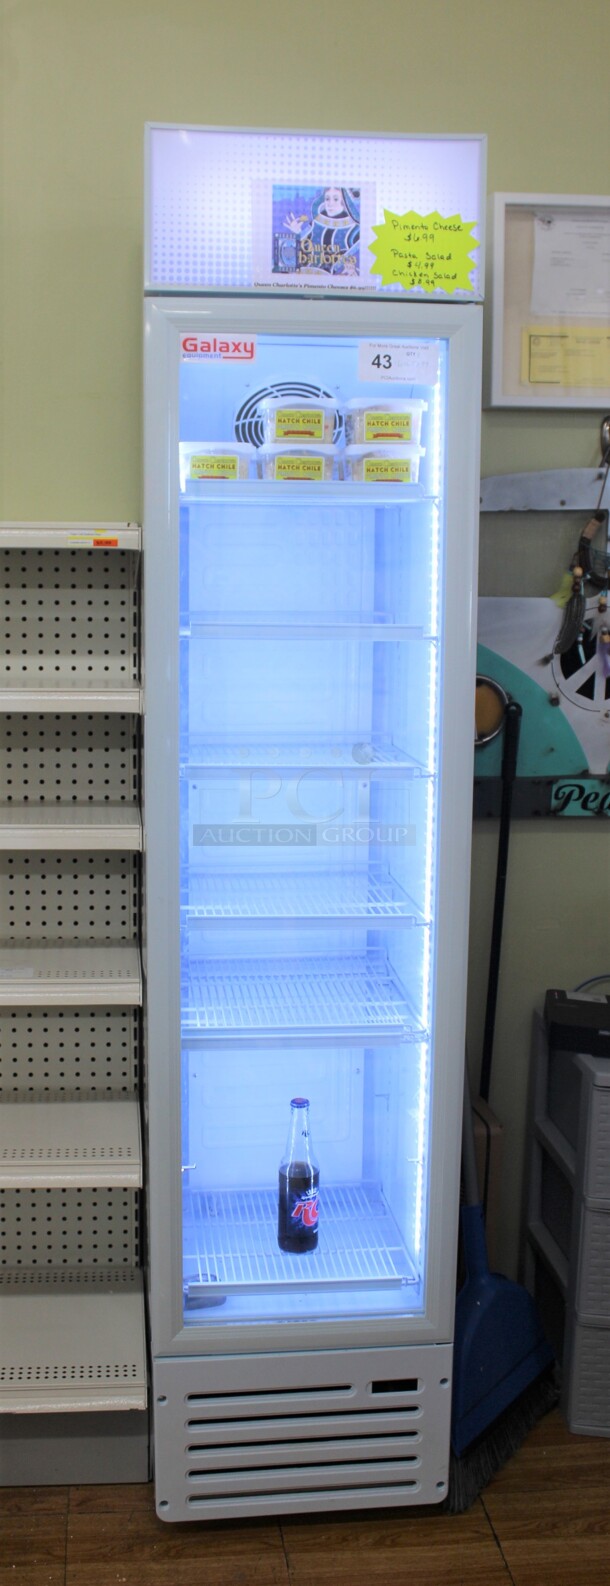 WOW! Like New Galaxy Equipment Model GDN-5 Commercial Single Glass Door Refrigerated Merchandising Cooler. 16x16.5x74. 120V/60Hz. Tested And Working! Buyer Must Remove. Shipping Is Not Available.